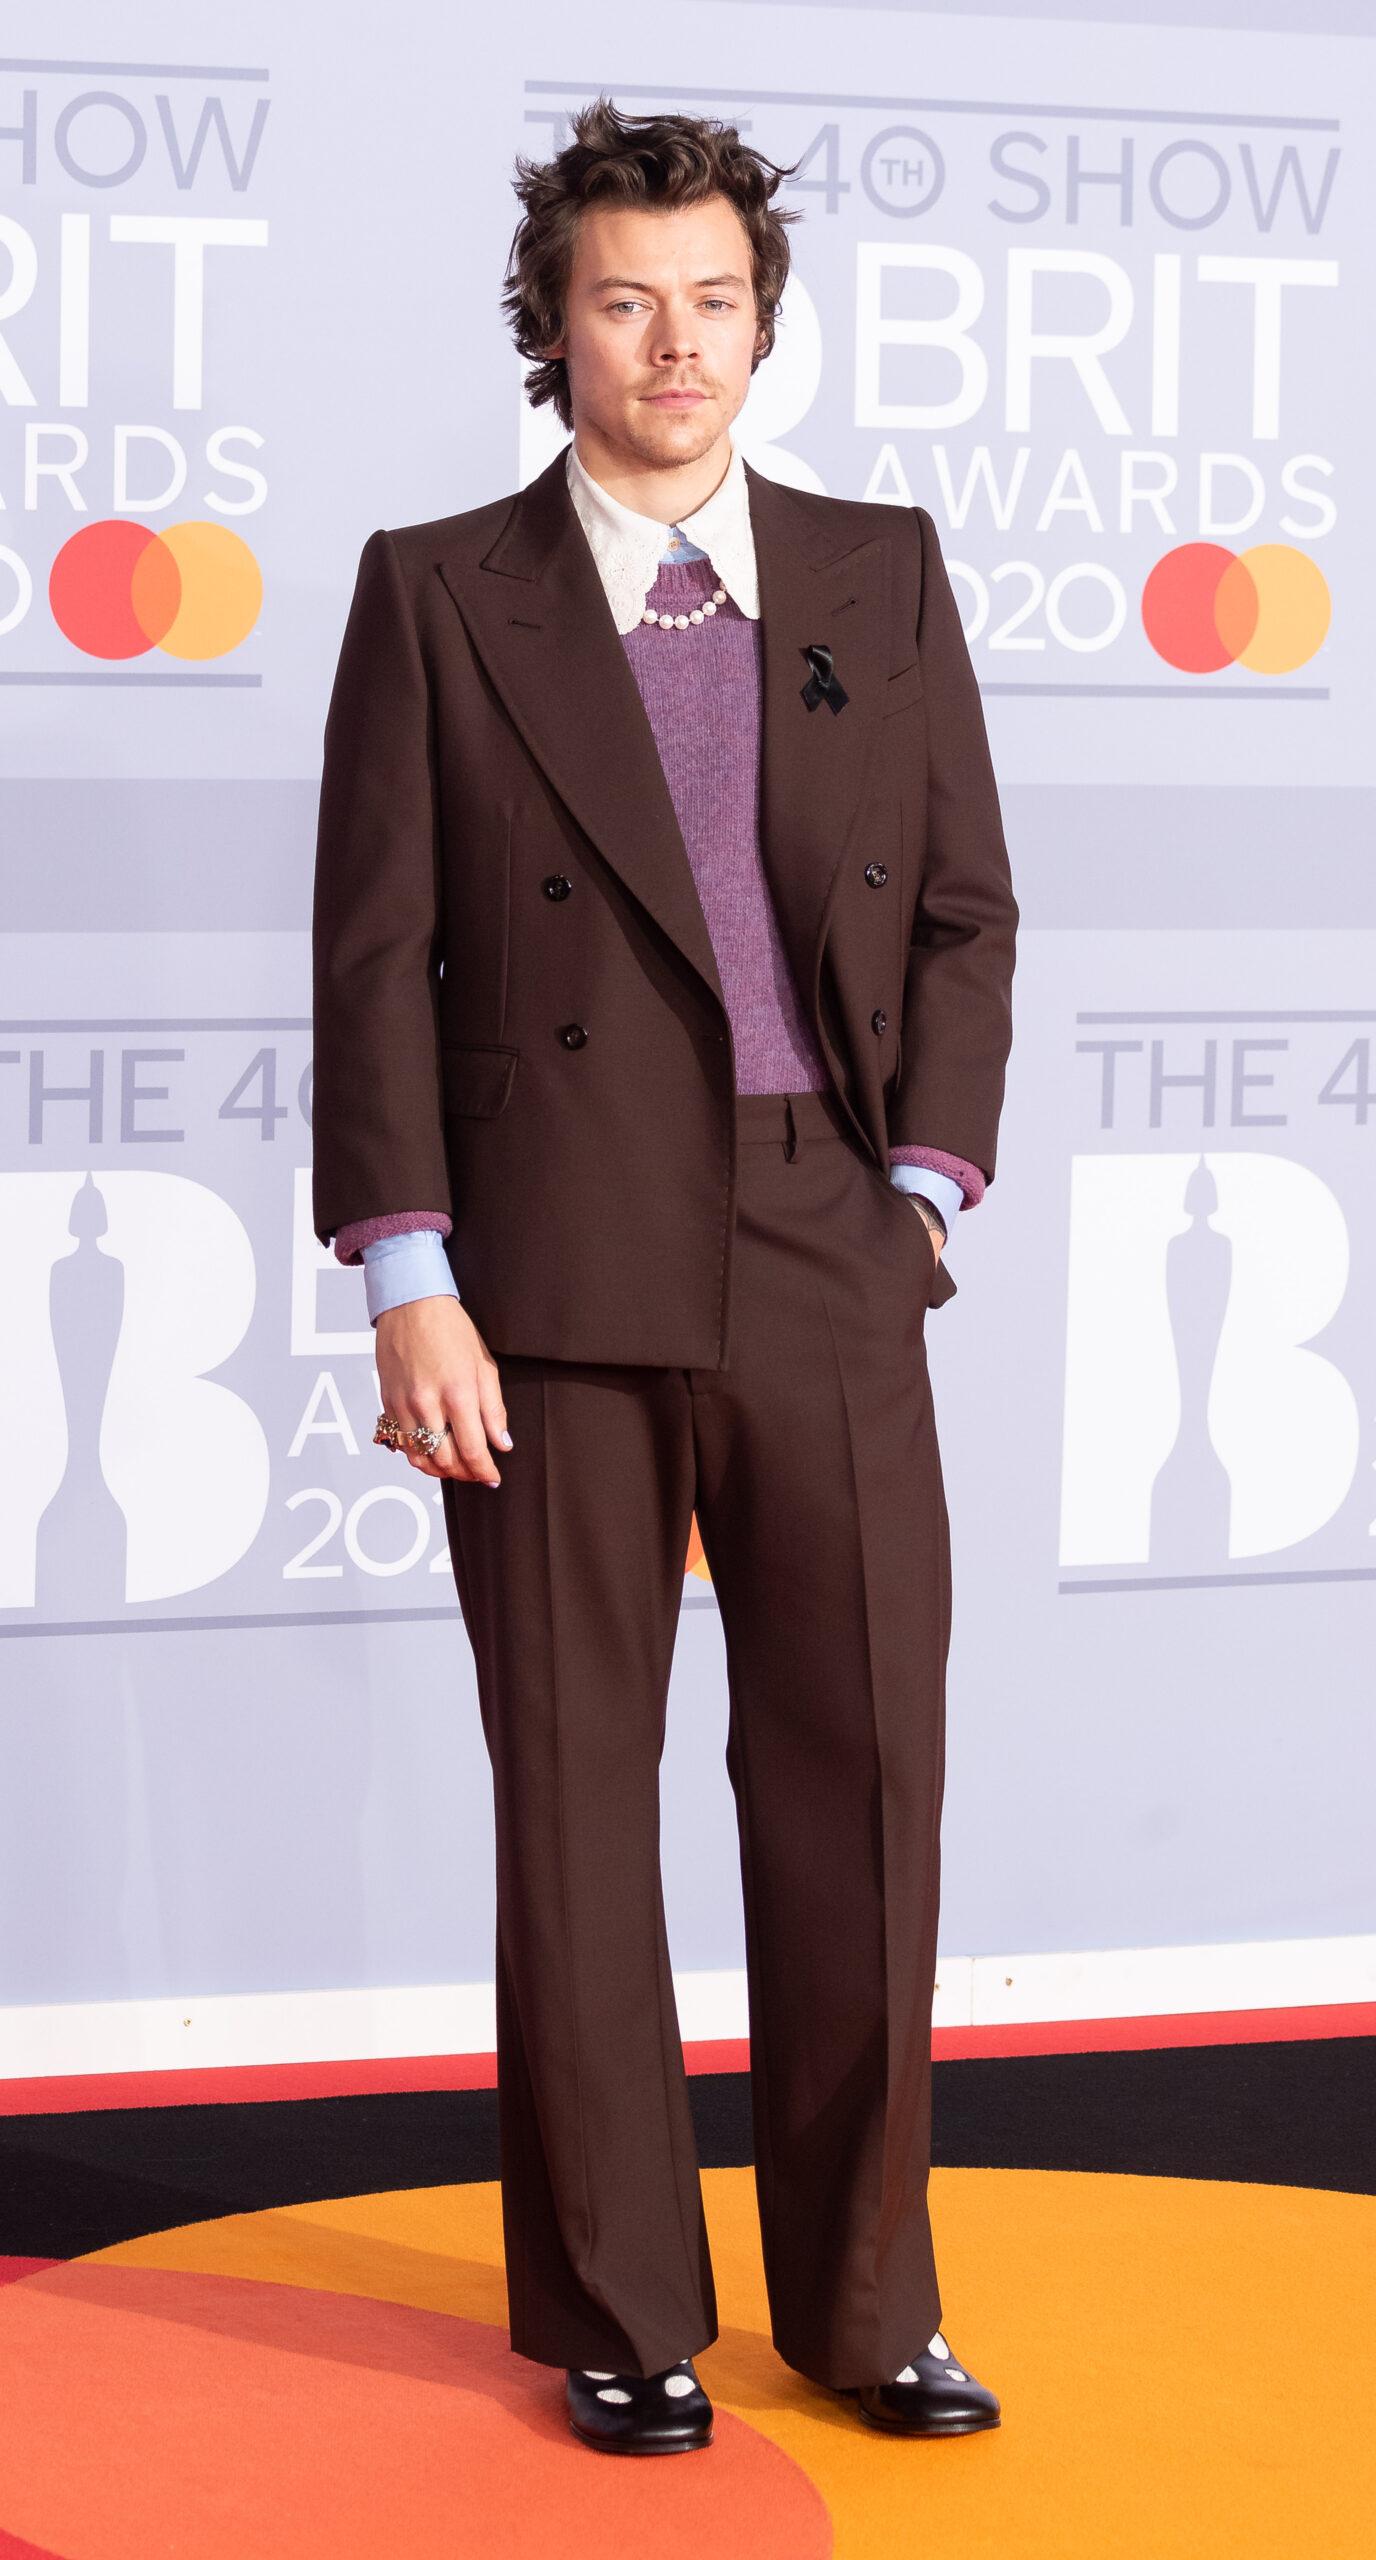 hHarry Styles The 40th BRIT Awards show Tuesday 18th February at The O2 Arena in London